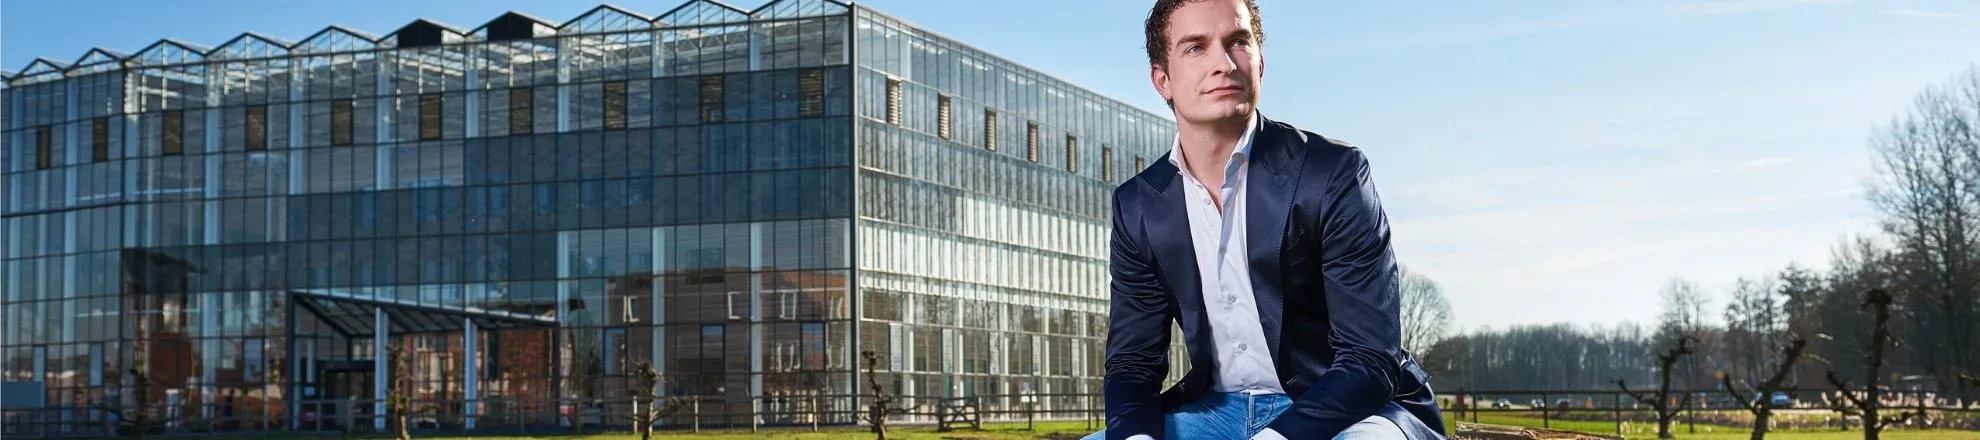 Karl Selles researcher at Aeres University of Applied Sciences Dronten